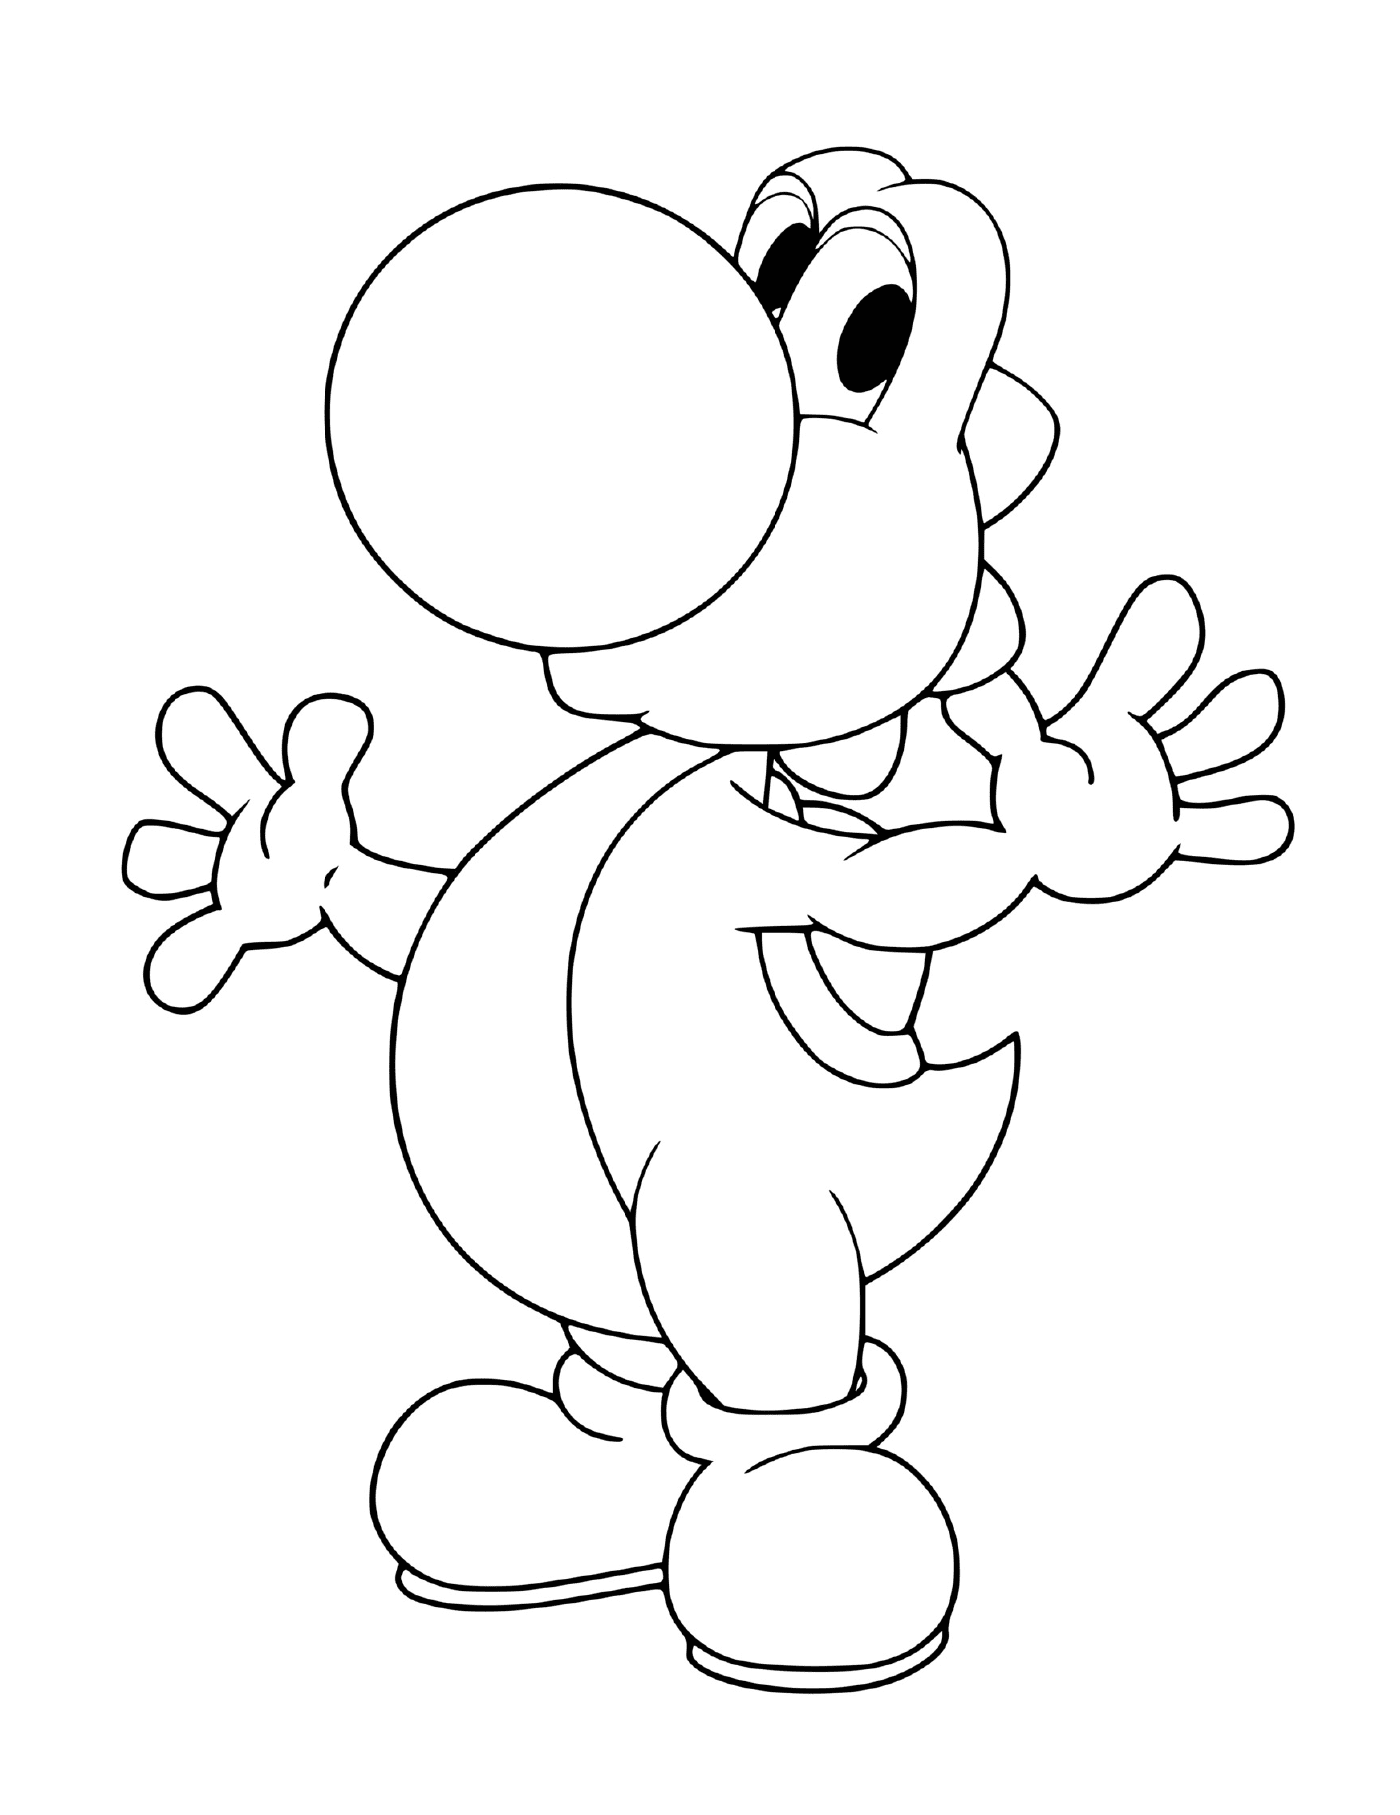 yoshi apparence reptilienne avec nez rond